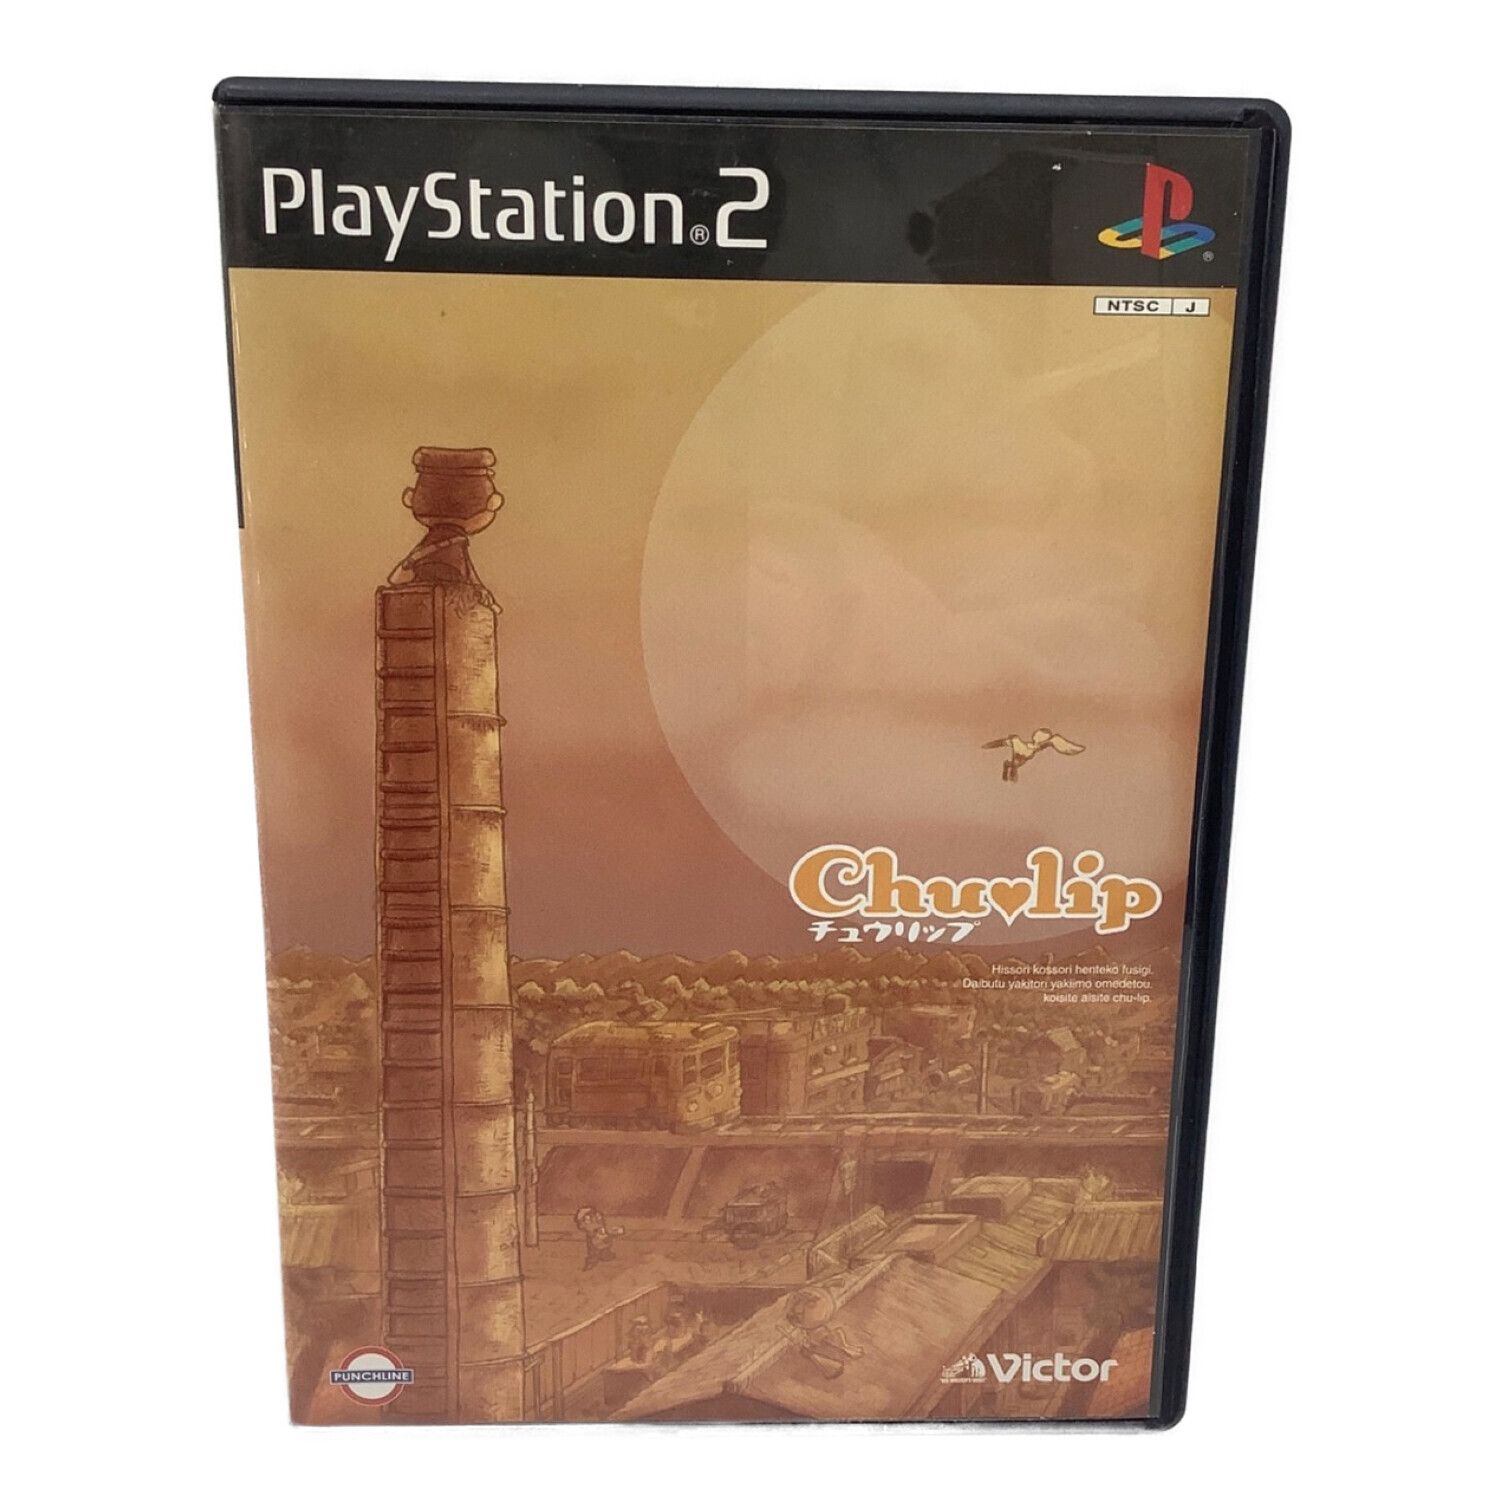 PS2用ソフト ＊ Chulip -｜トレファクONLINE